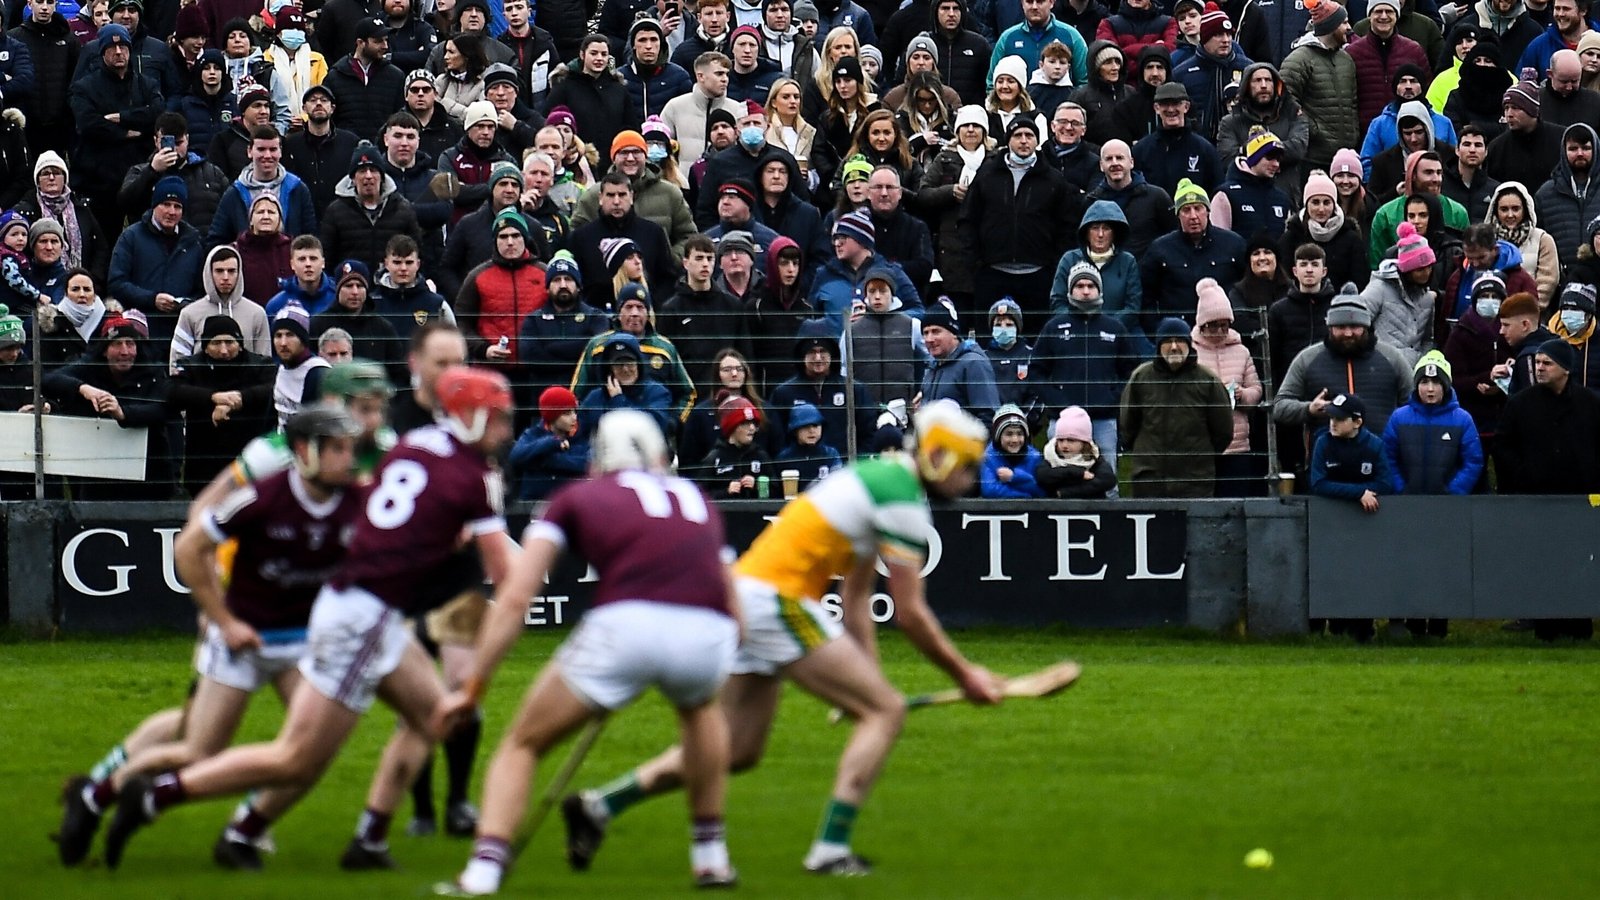 Image - Fans at the 2022 Walsh Cup game between Offaly and Galway